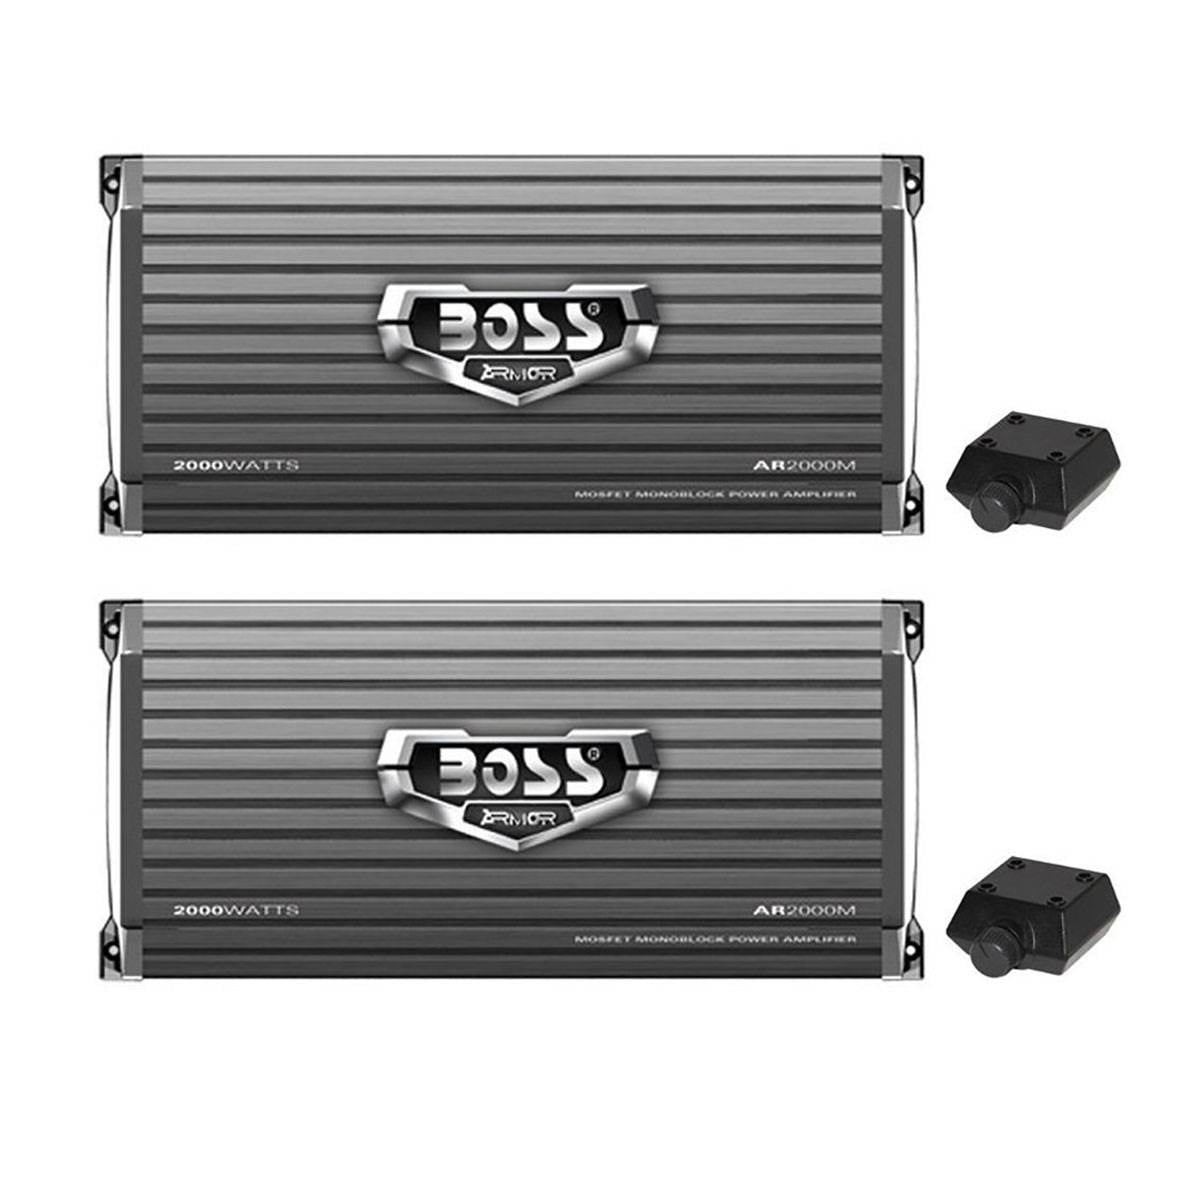 Planet Audio MB300.4D Mini Bang 4 Channel 1200 Watt Full Range Class D Power Car Amplifier with Remote 2 Pack